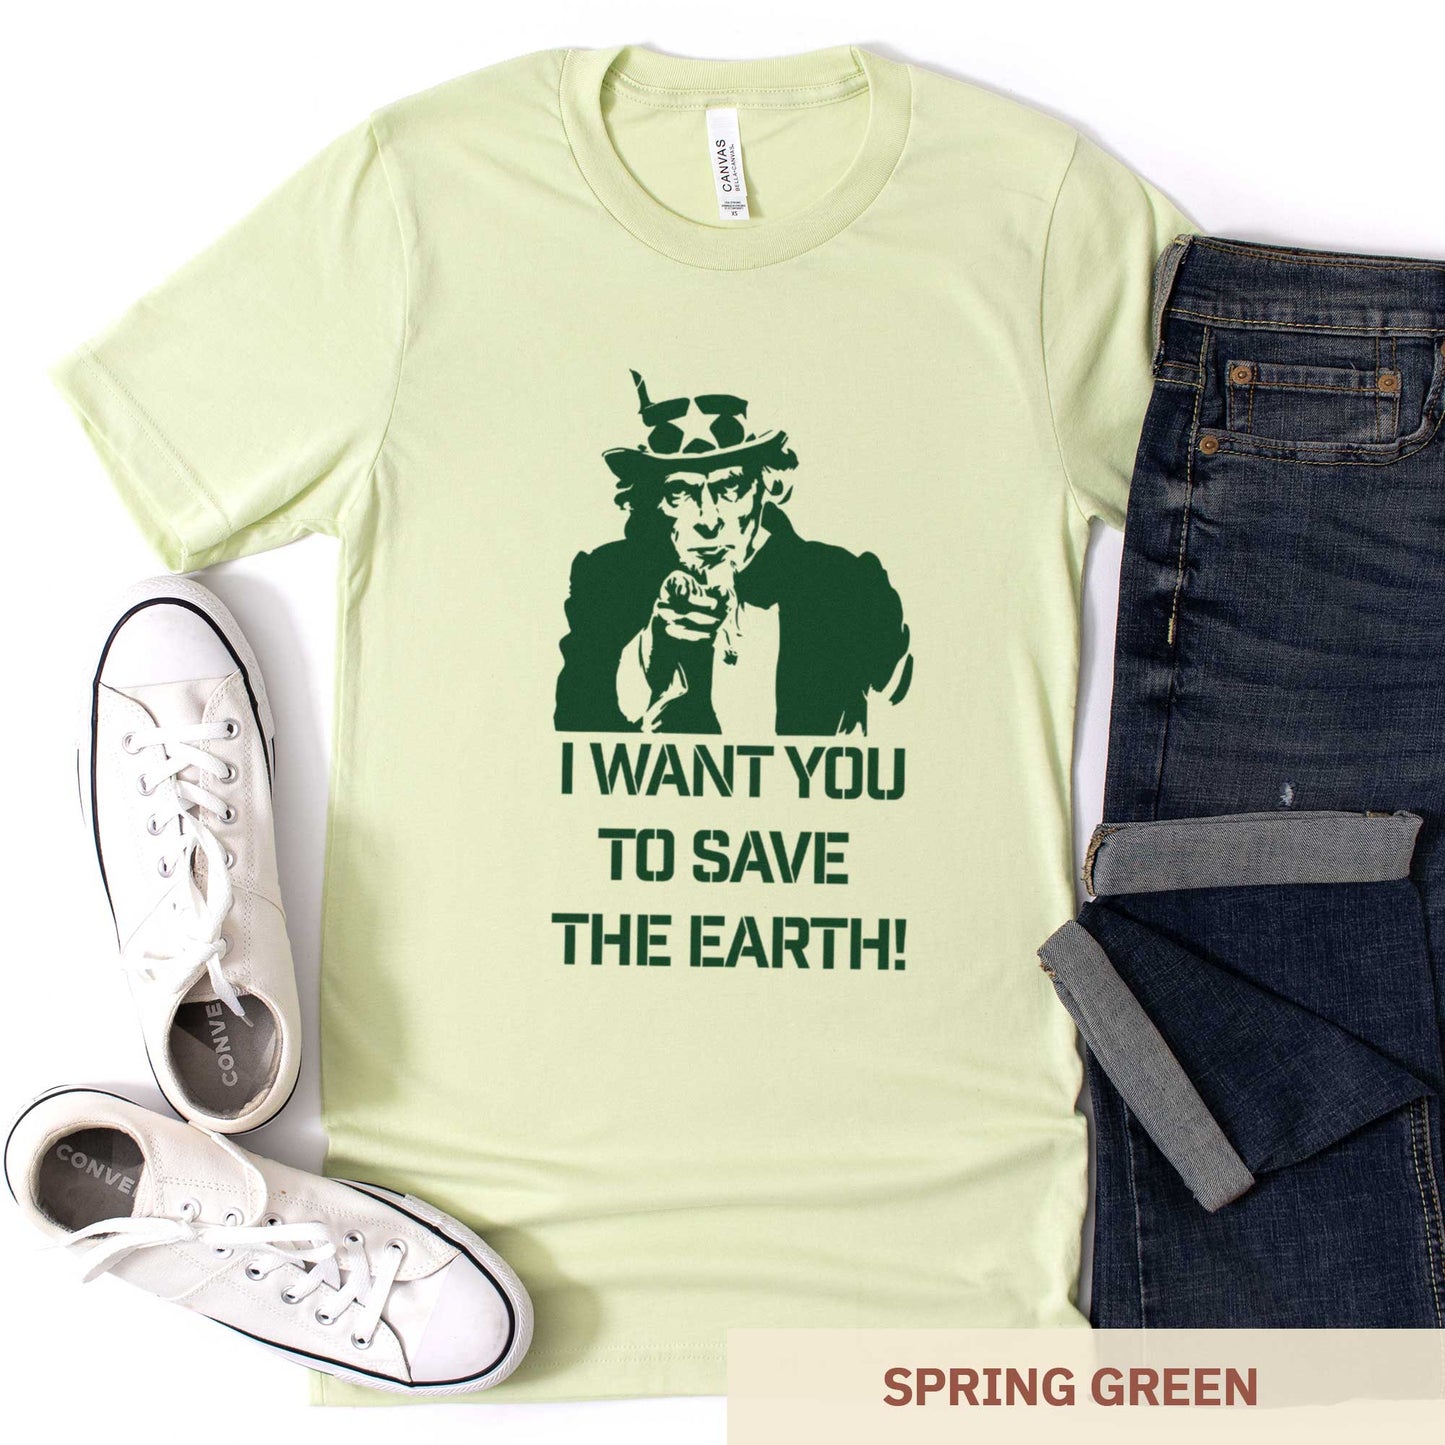 A spring green Bella Canvas t-shirt featuring Uncle Sam and the words I want you to save the Earth.